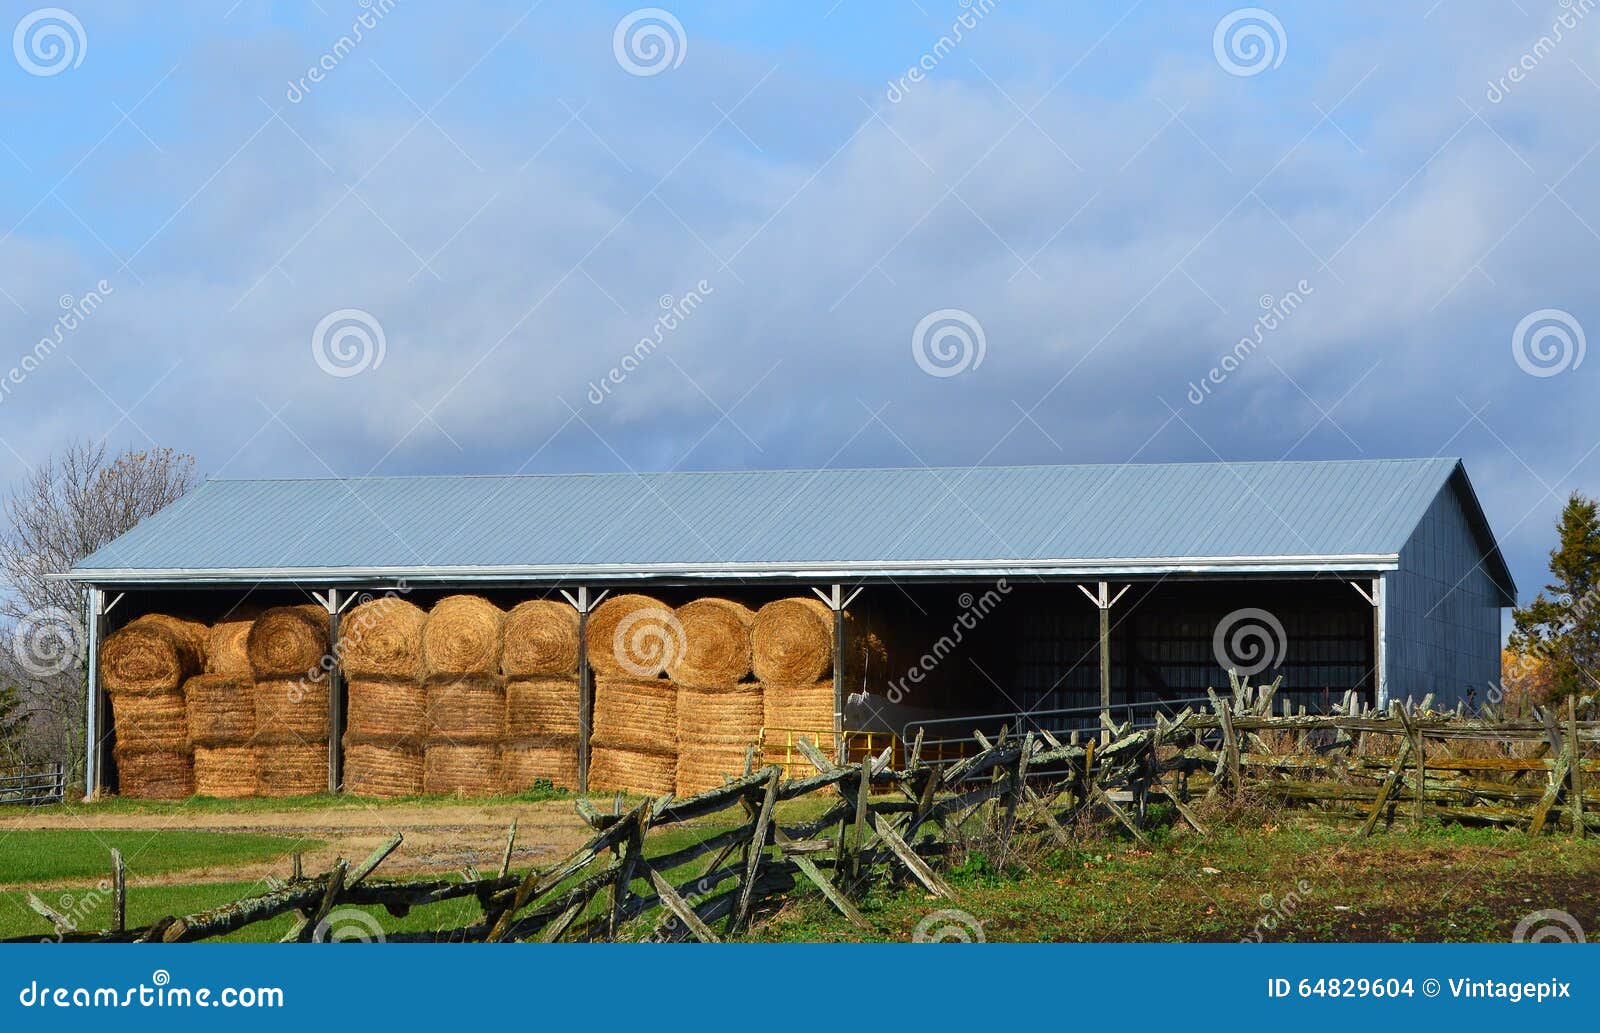 large round bales in storage shed stock photo - image of